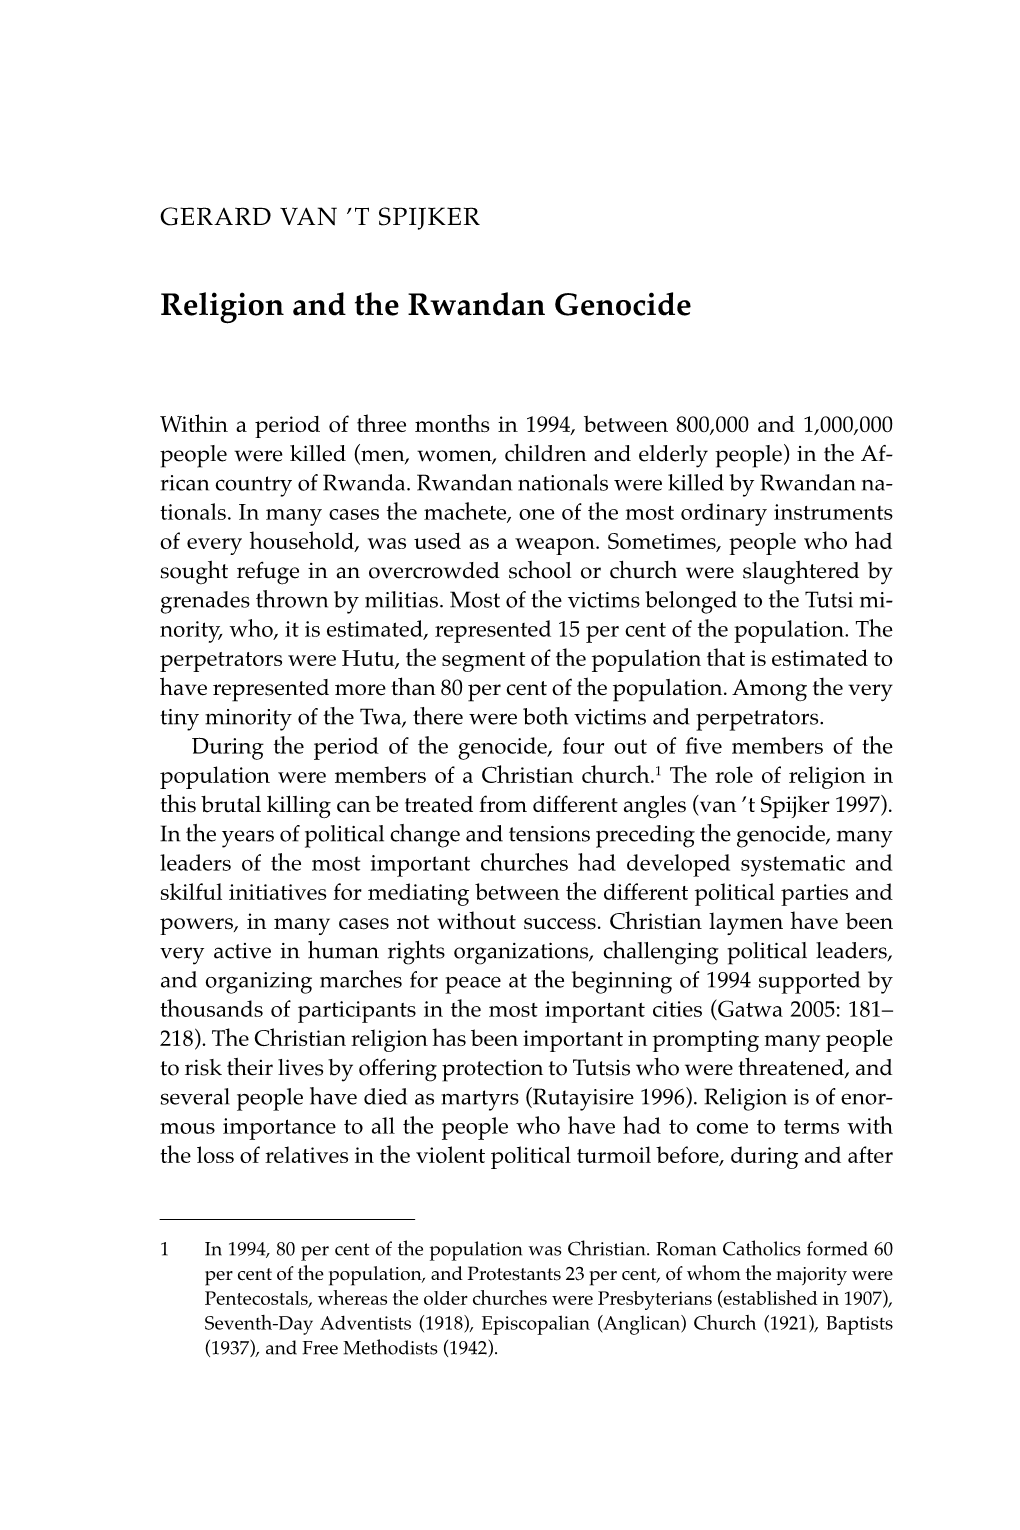 Religion and the Rwandan Genocide